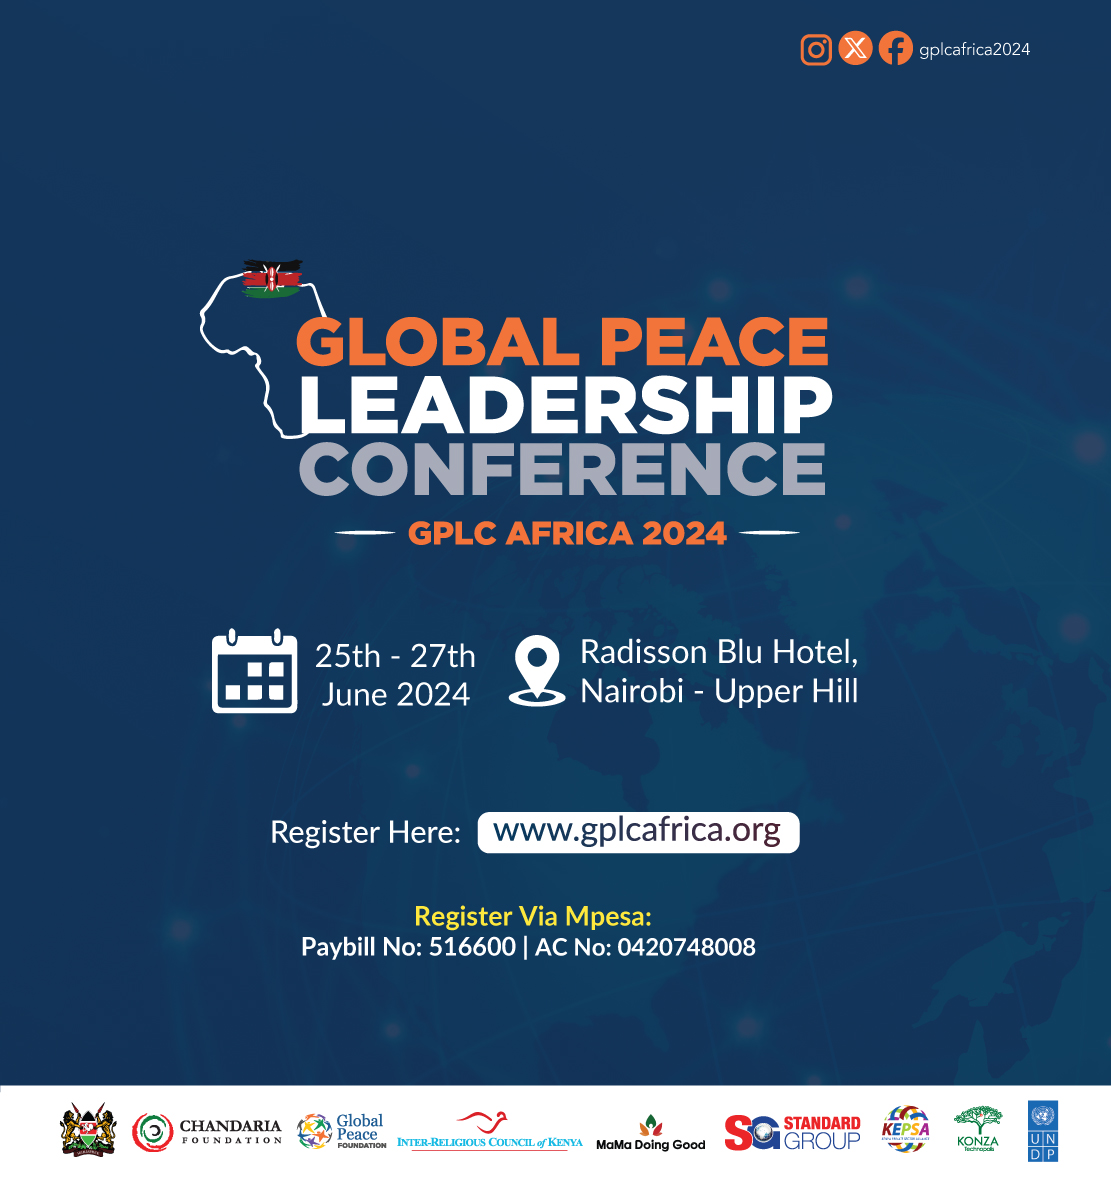 Have you registered yet? Join us for three days of inspiring sessions and collaborative workshops centred on building Africa's more peaceful and sustainable future. gplcafrica.org